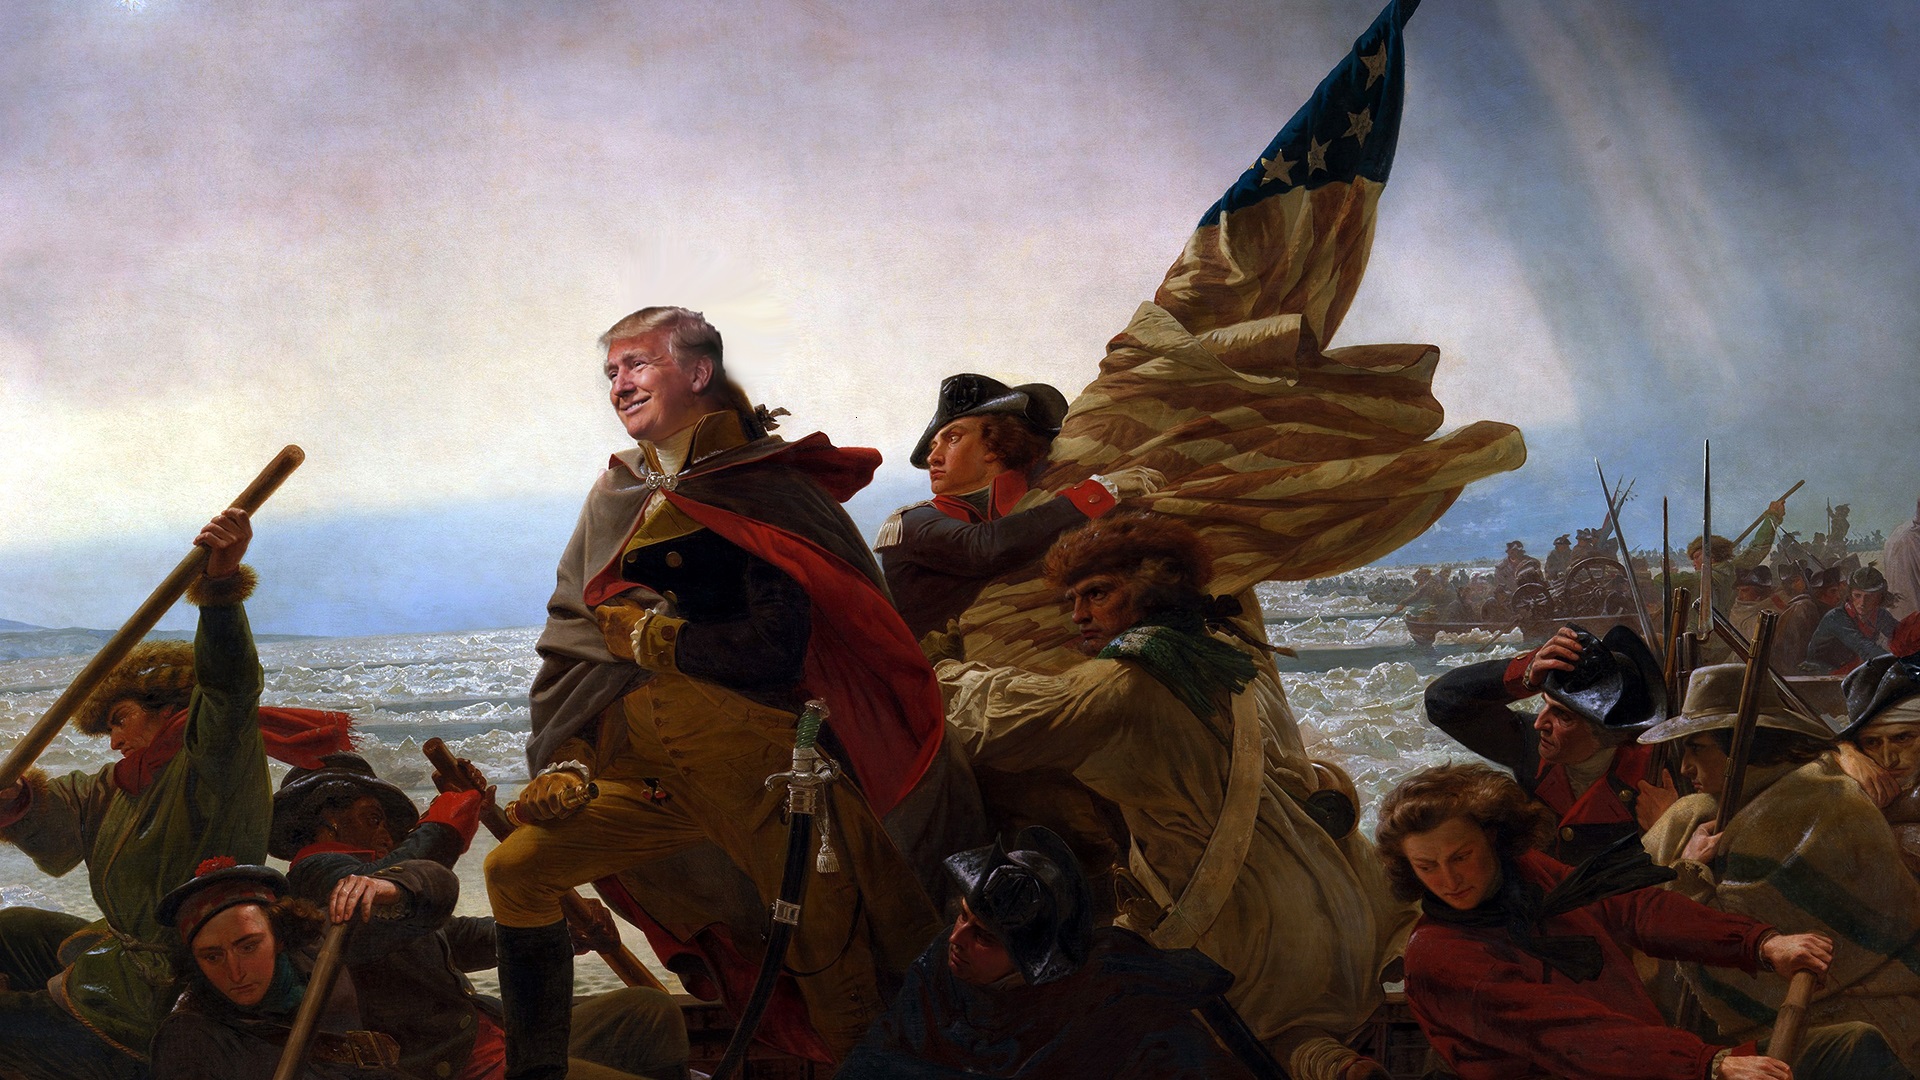 Wallpaper Of The Day: Trump Crossing The Delaware